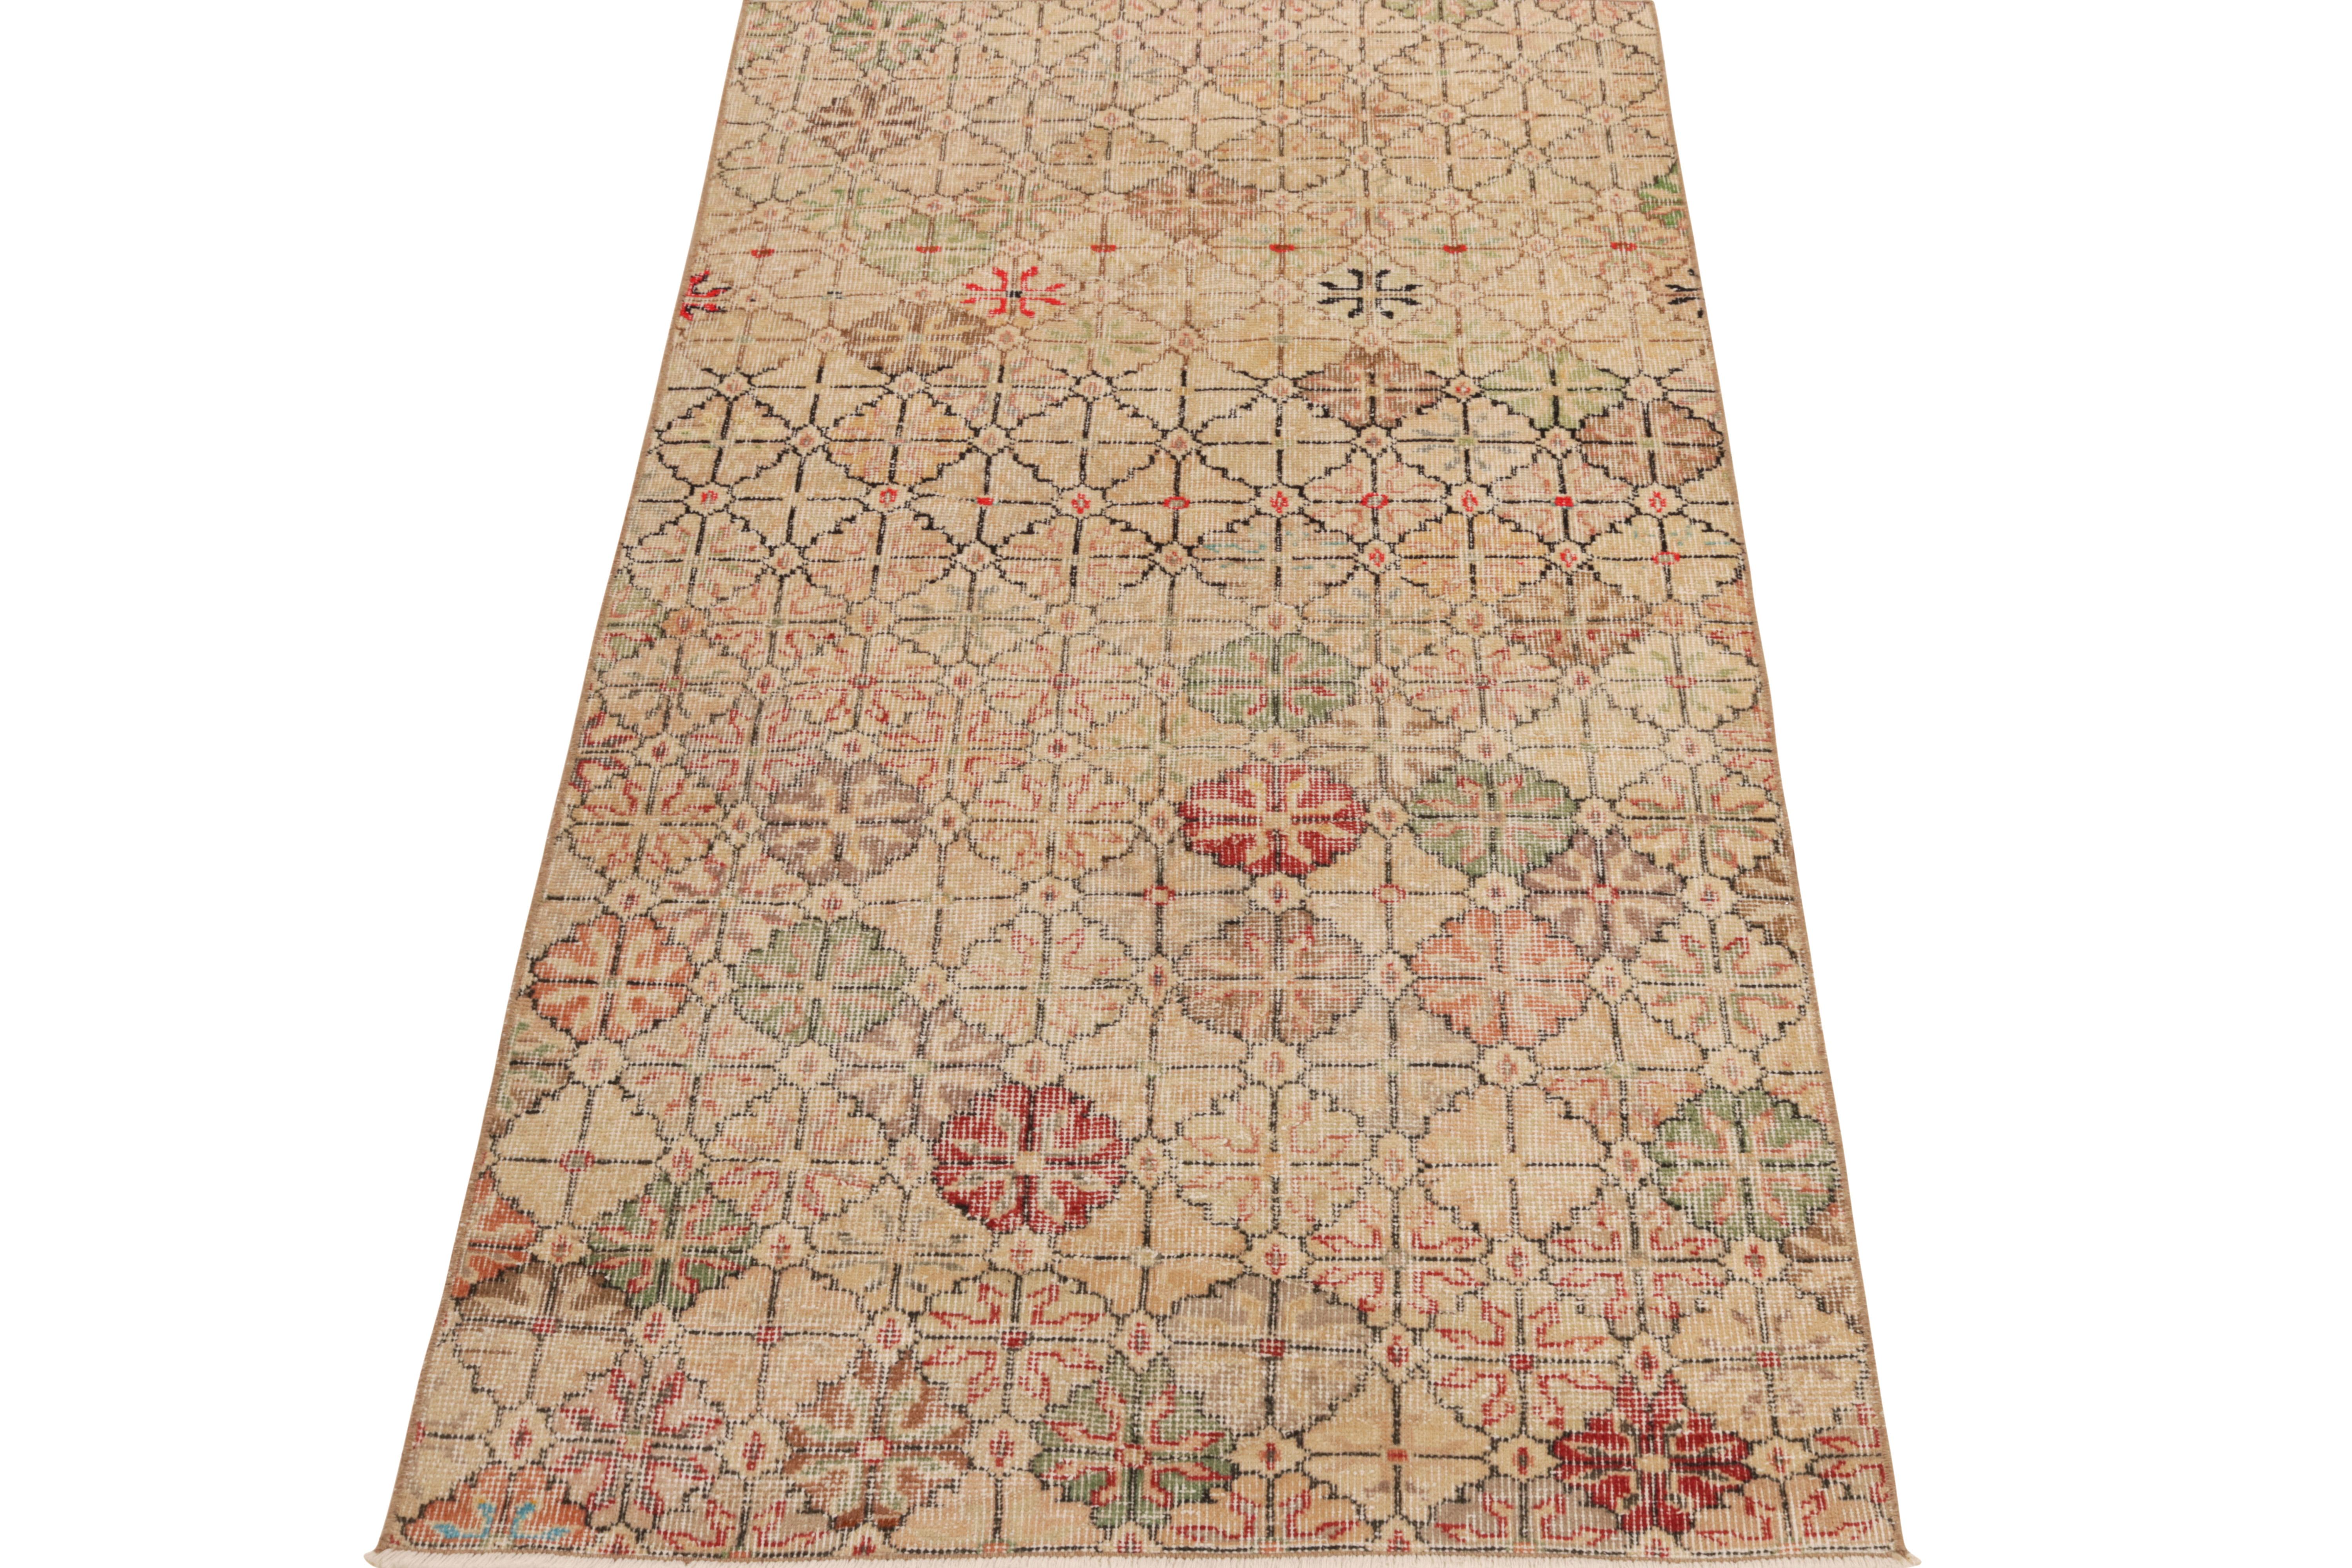 From Rug & Kilim’s mid-century Pasha collection, a 1960s vintage rug celebrating the works of a bold multidisciplinary designer from Turkey. Hand-knotted in low-sheared, texturally distressed wool, this 3x6 piece unravels a spectacle of a glorious